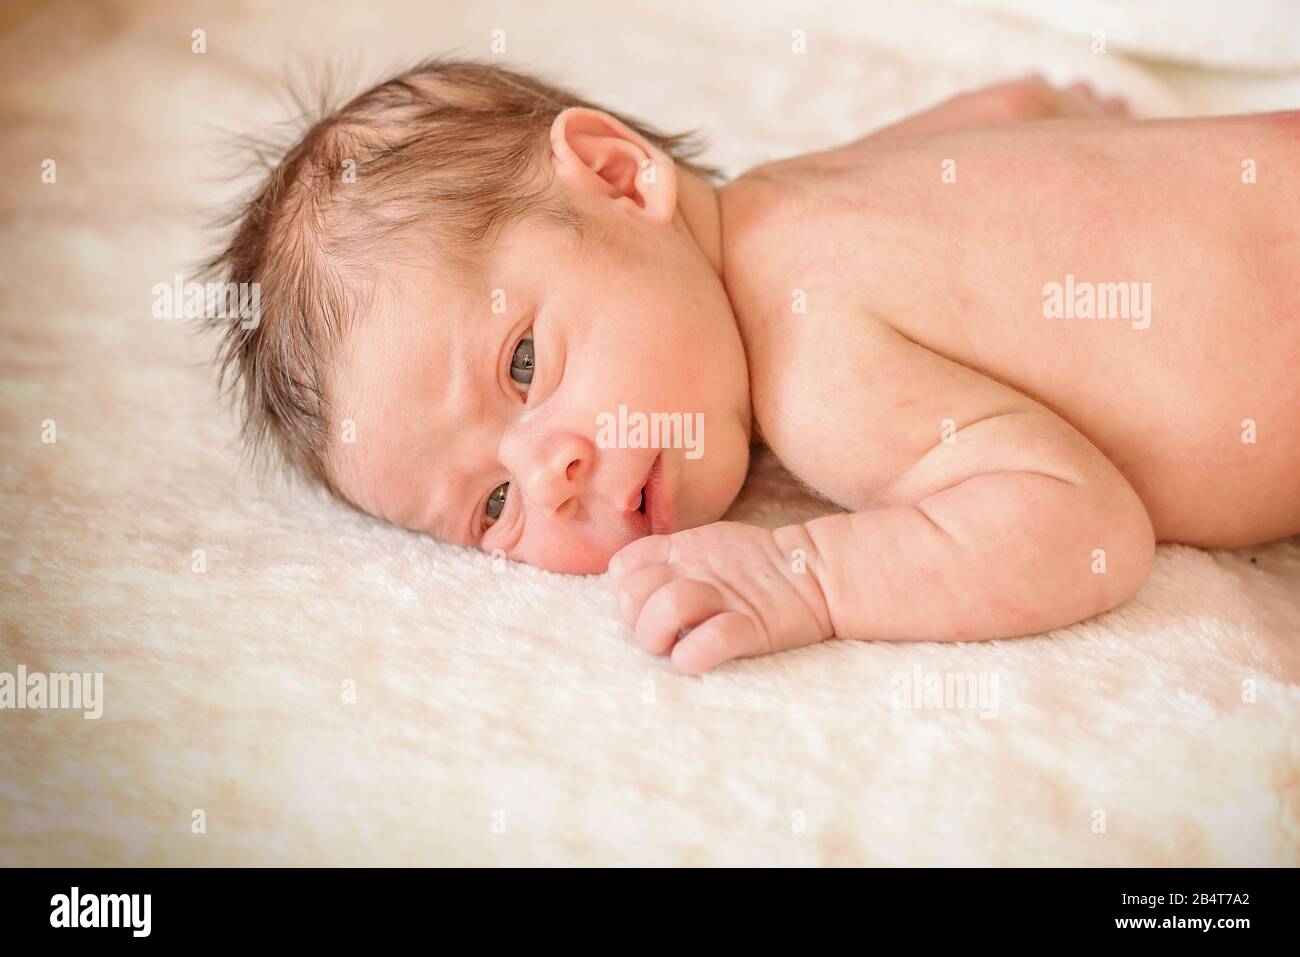 Newborn infant naked baby boy laying on the blanket Stock Photo